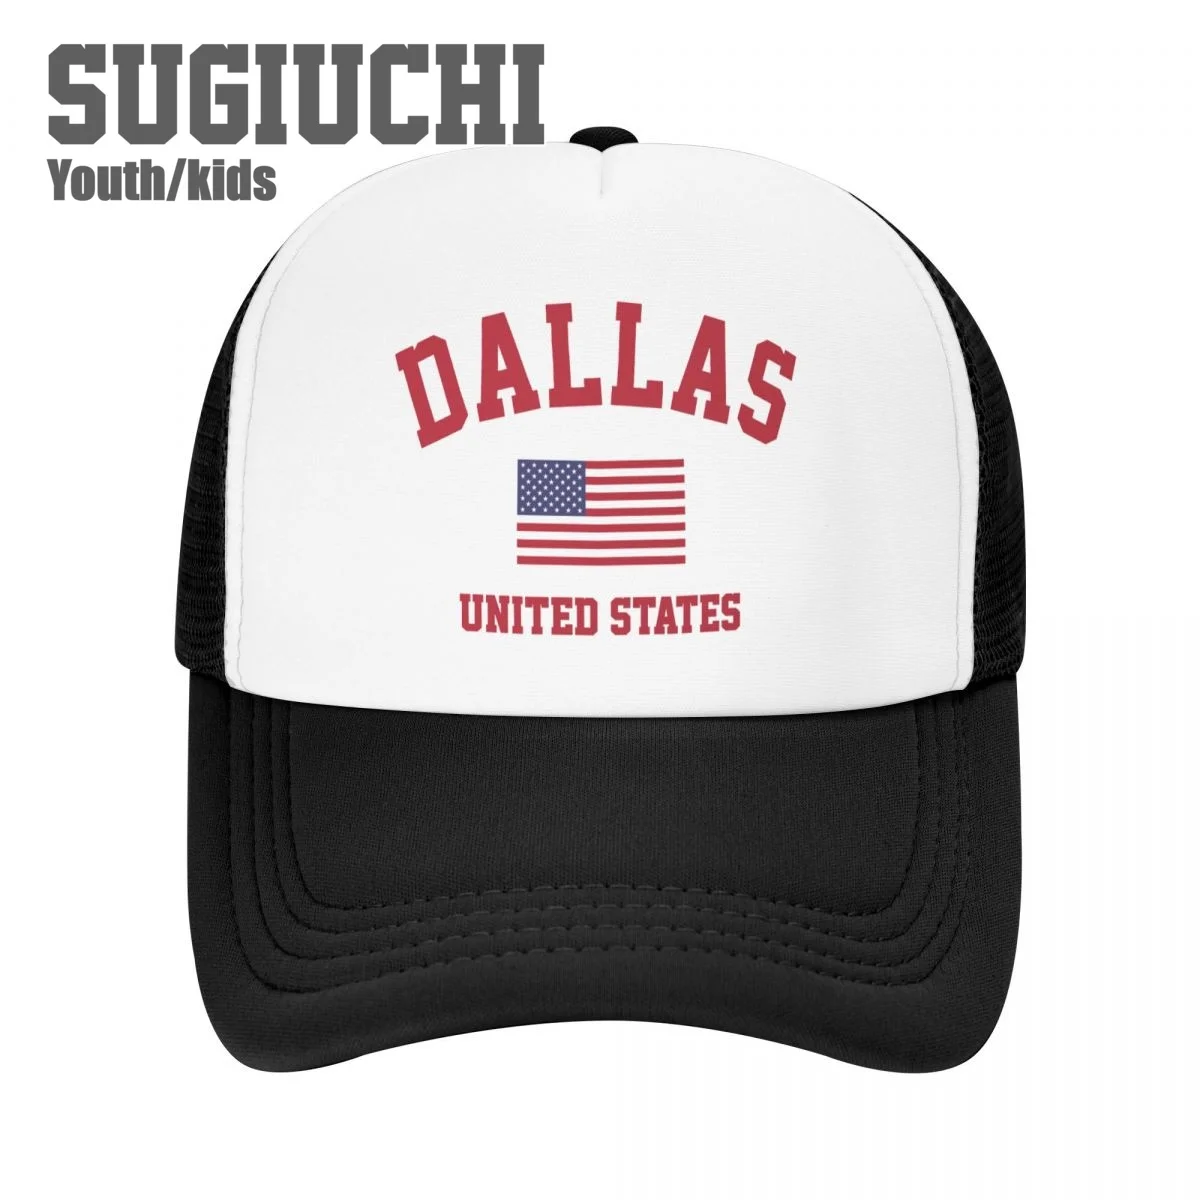 

Kids Mesh Cap Hat Dallas Of USA United States City Baseball Caps for Youth Boys Girls Pupil Children's Hats Outdoor Unisex